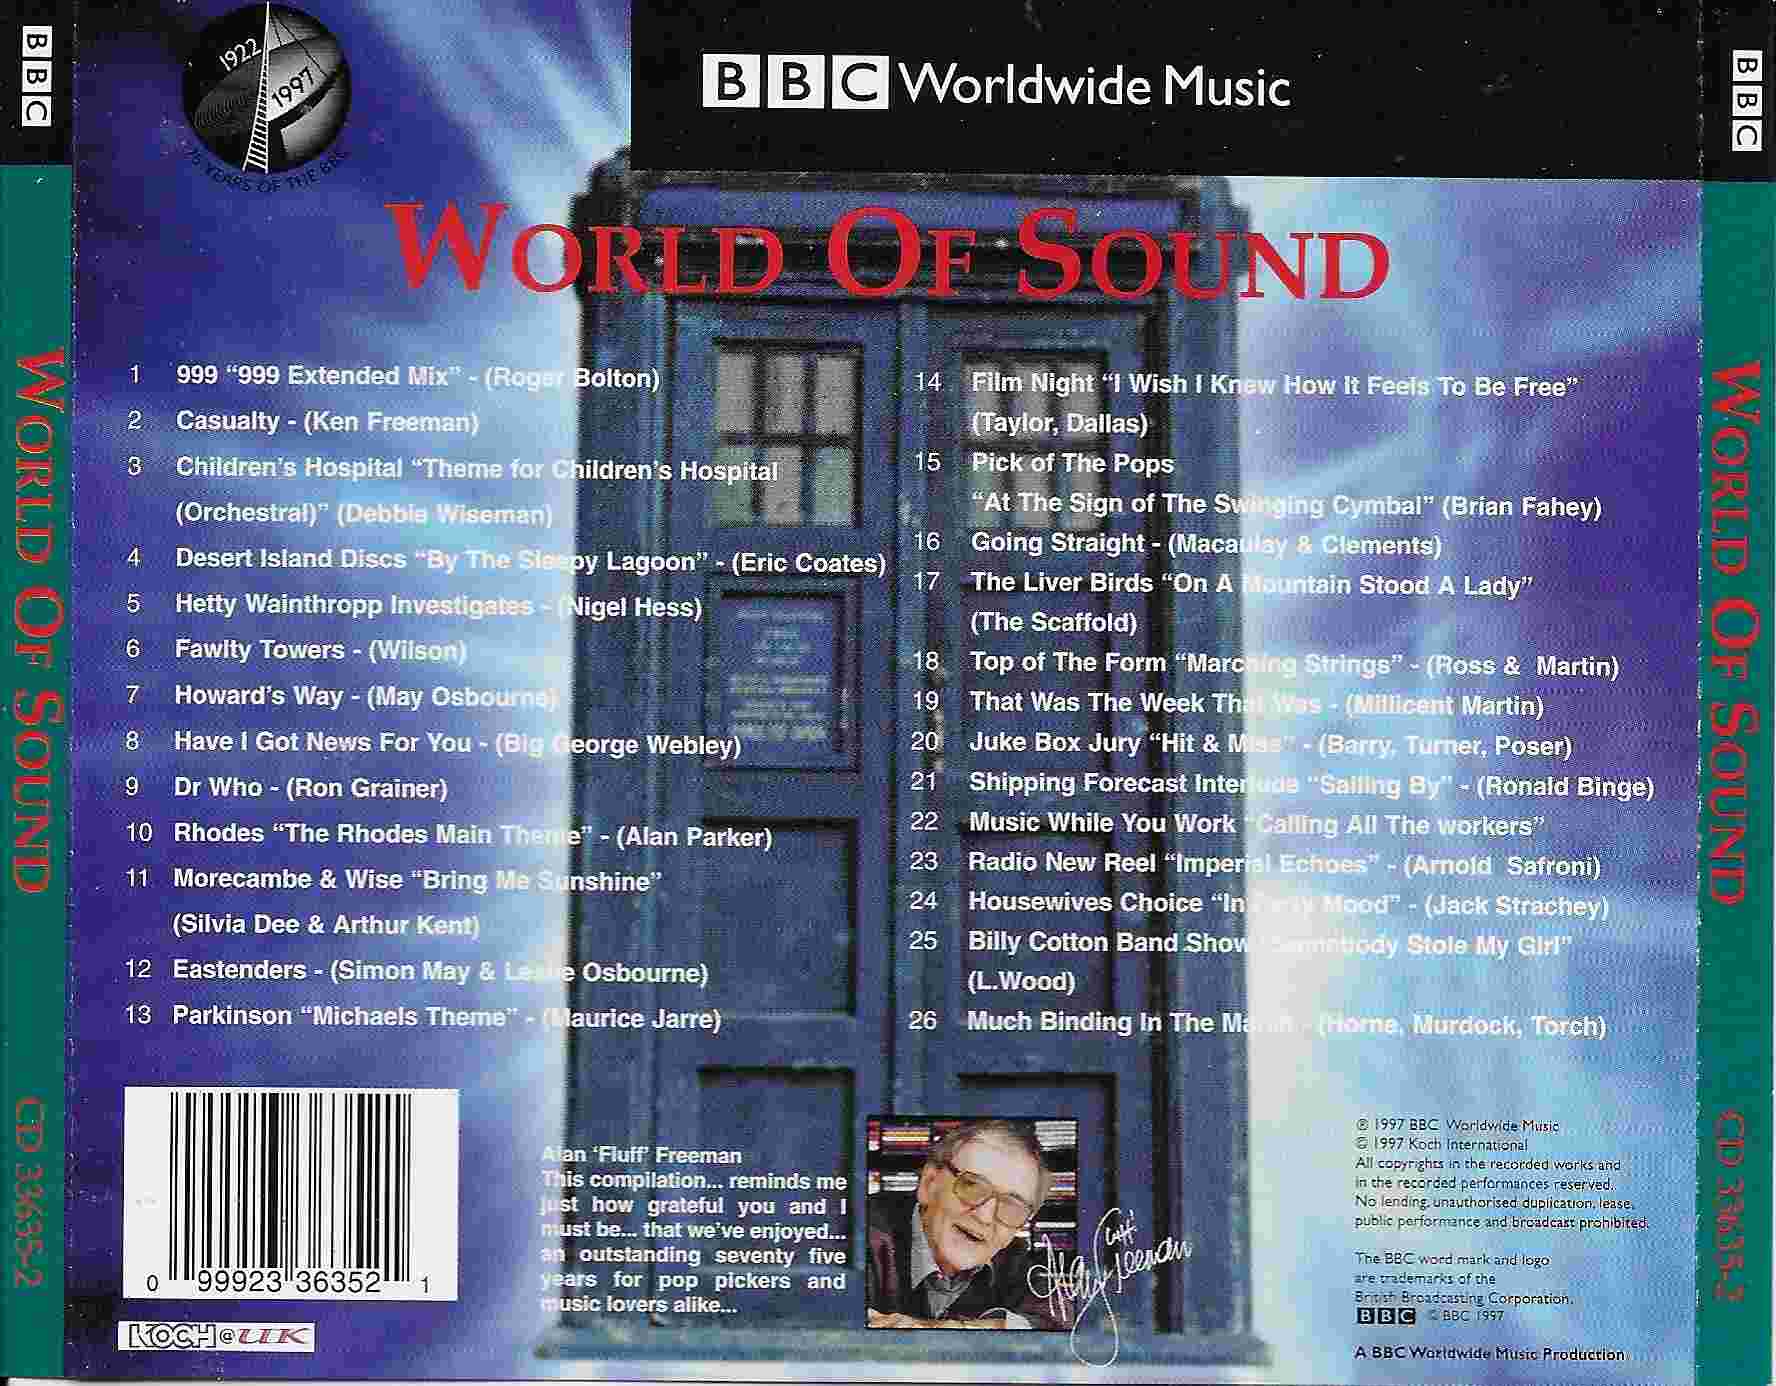 Picture of CD 33635-2 World of sound - Favourite themes from BBC television and radio by artist Various from the BBC records and Tapes library